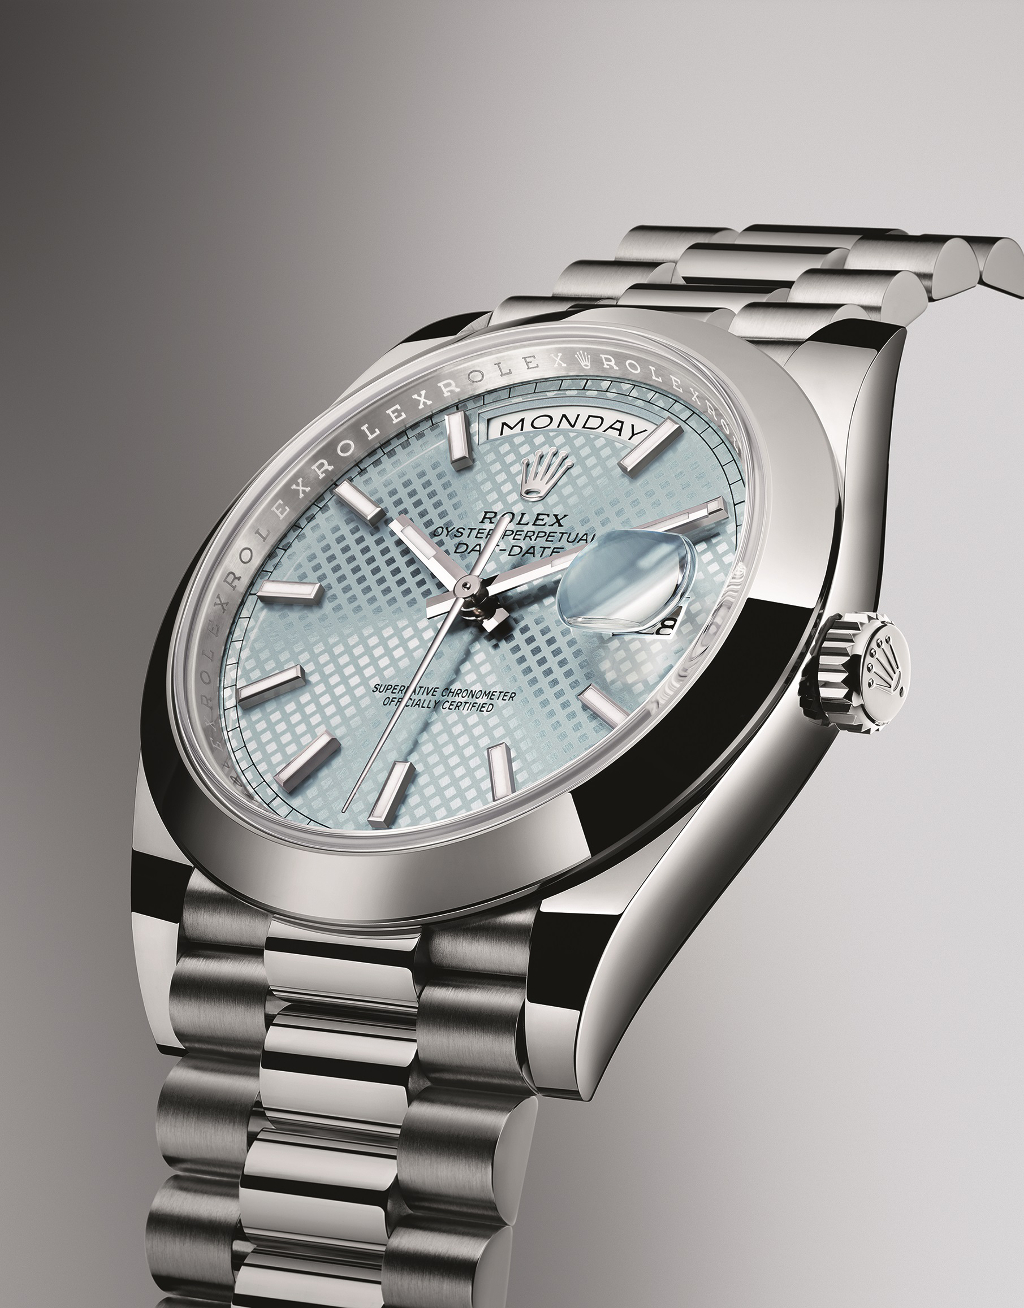 The new Rolex Daydate 40. The 40, like the new Yachtmaster 40, represents the size of the watch. 